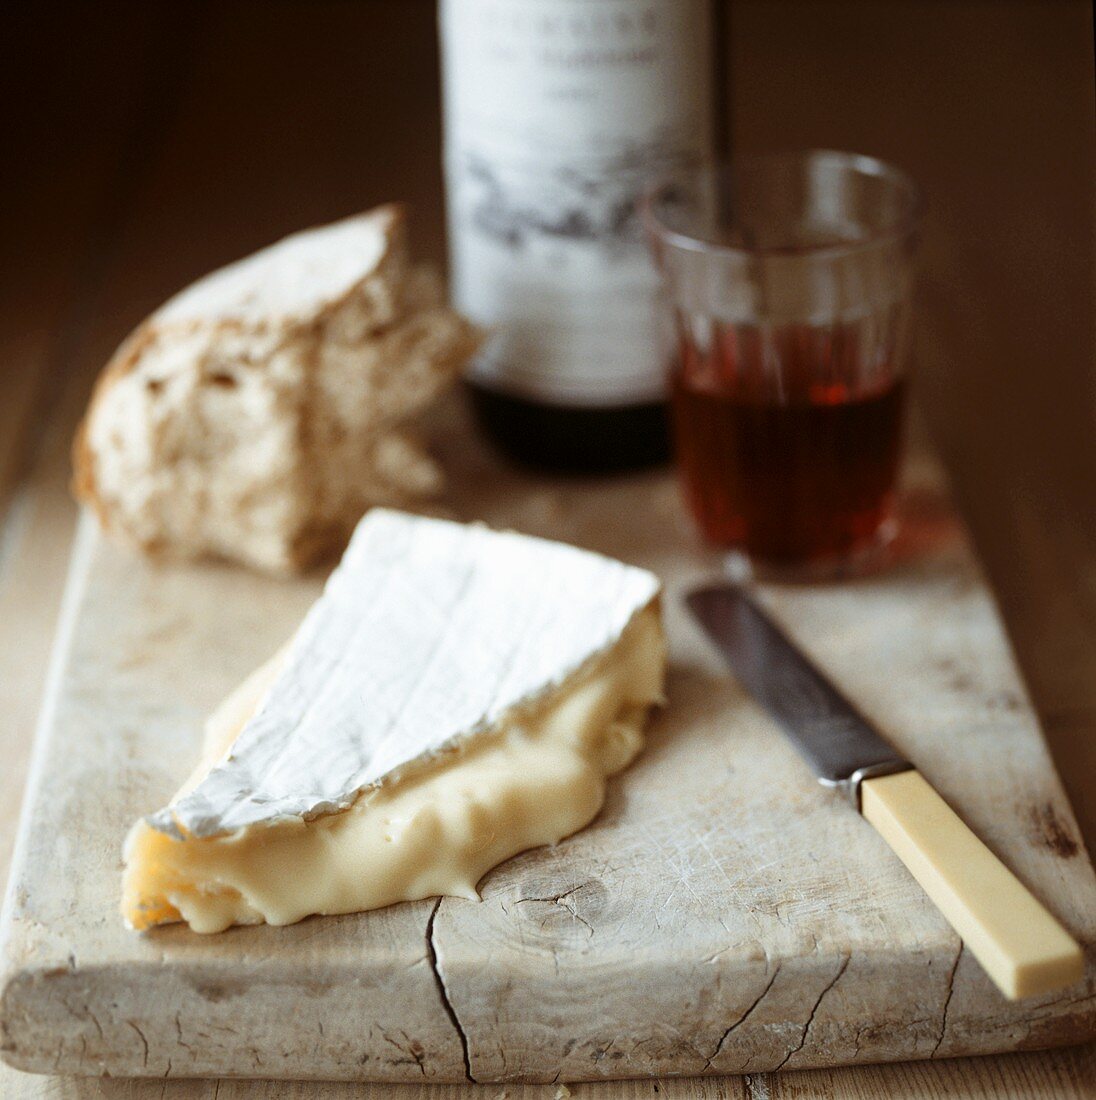 Piece of Brie, bread and red wine